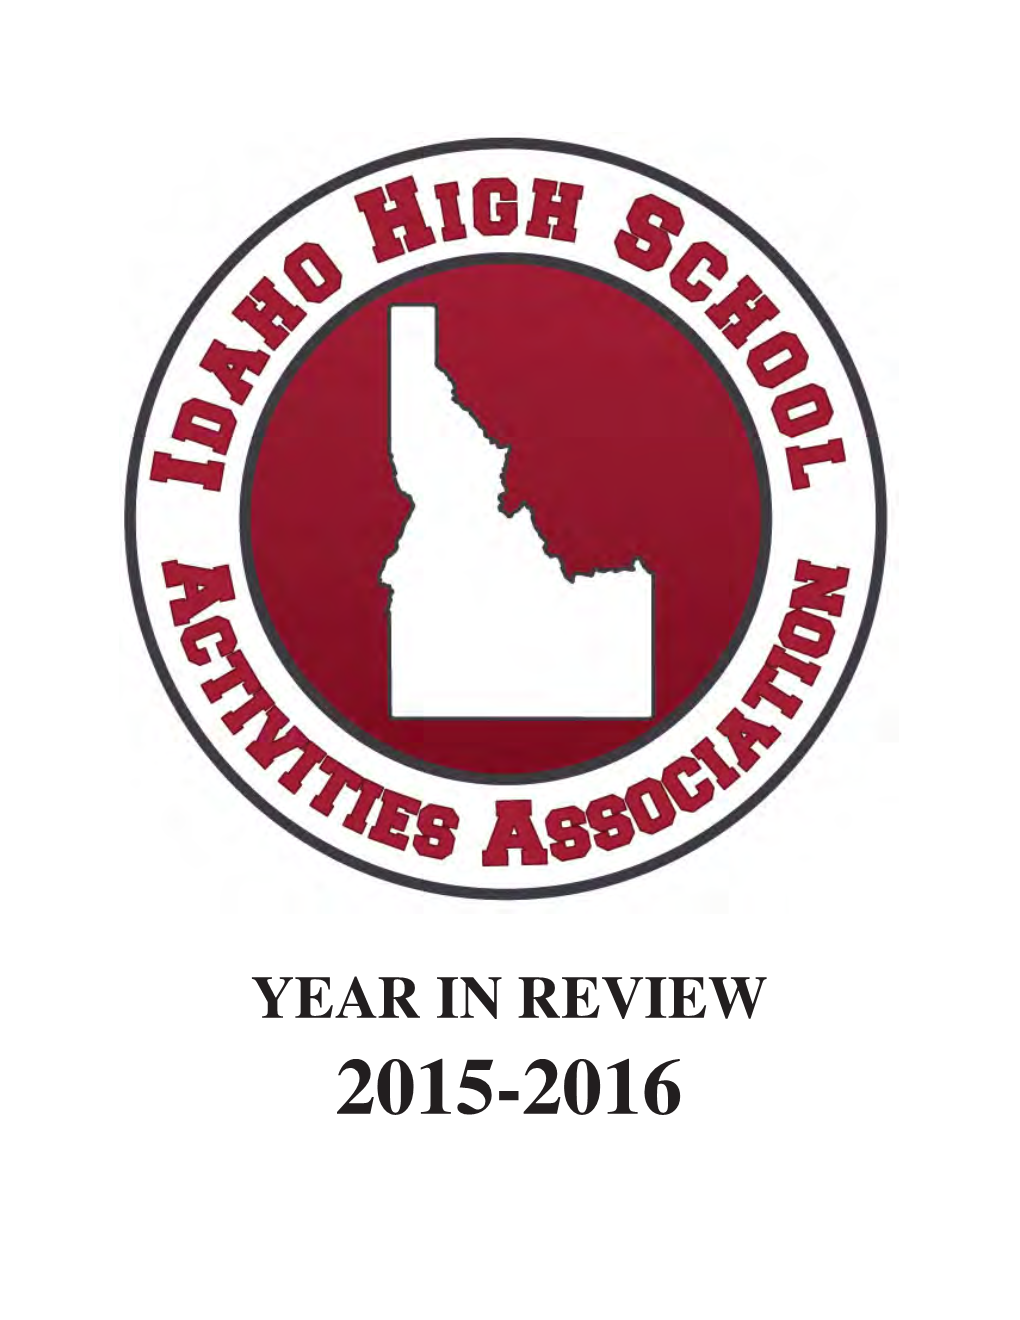 Year in Review 2015-2016